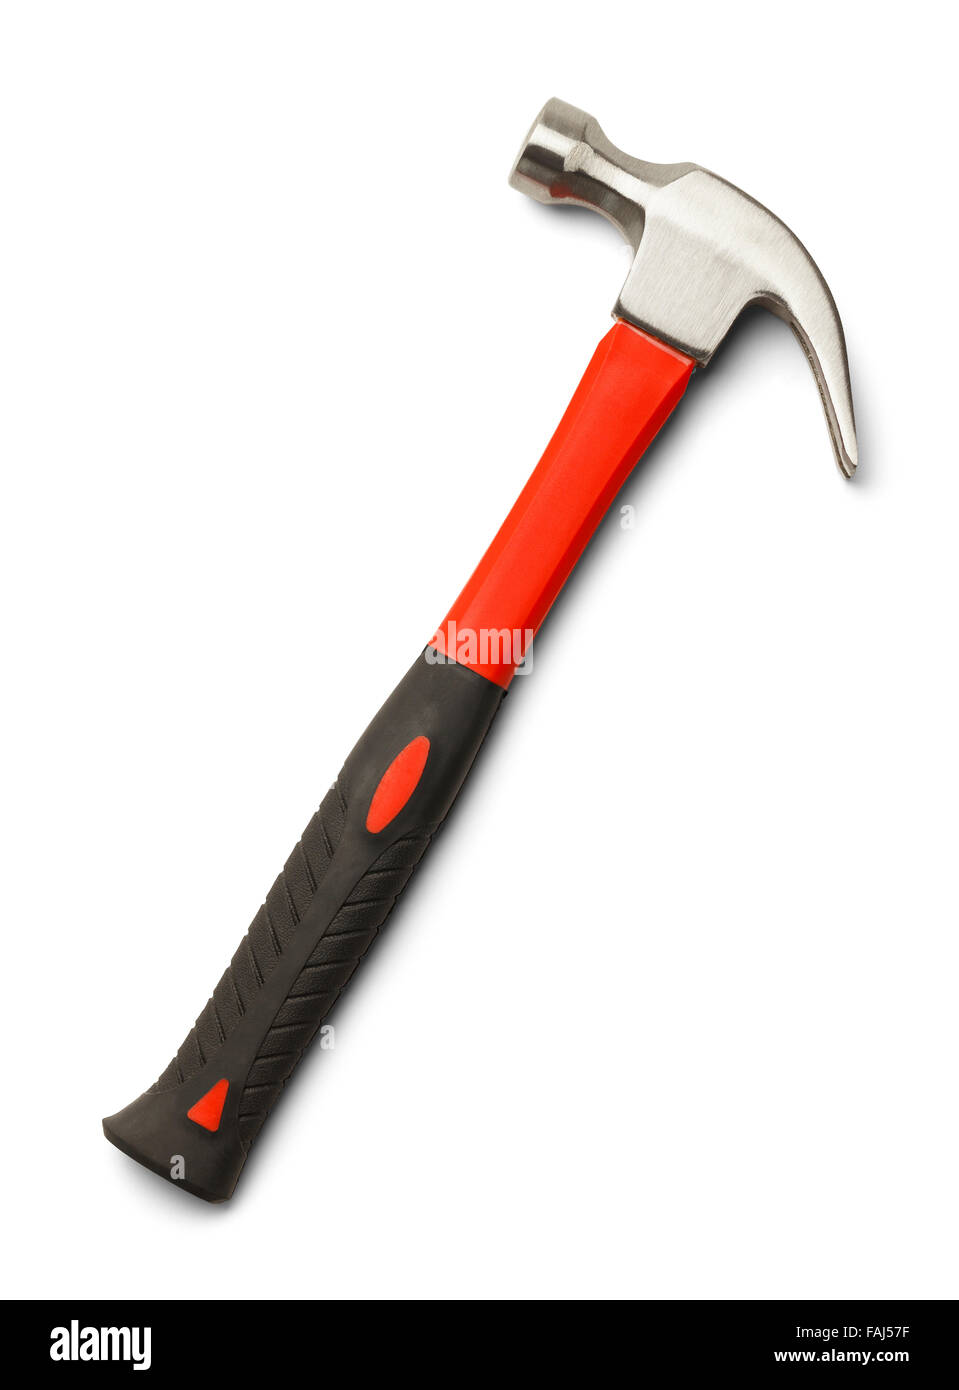 New Construction Hammer with Copy Space Isolated on a White Background. Stock Photo